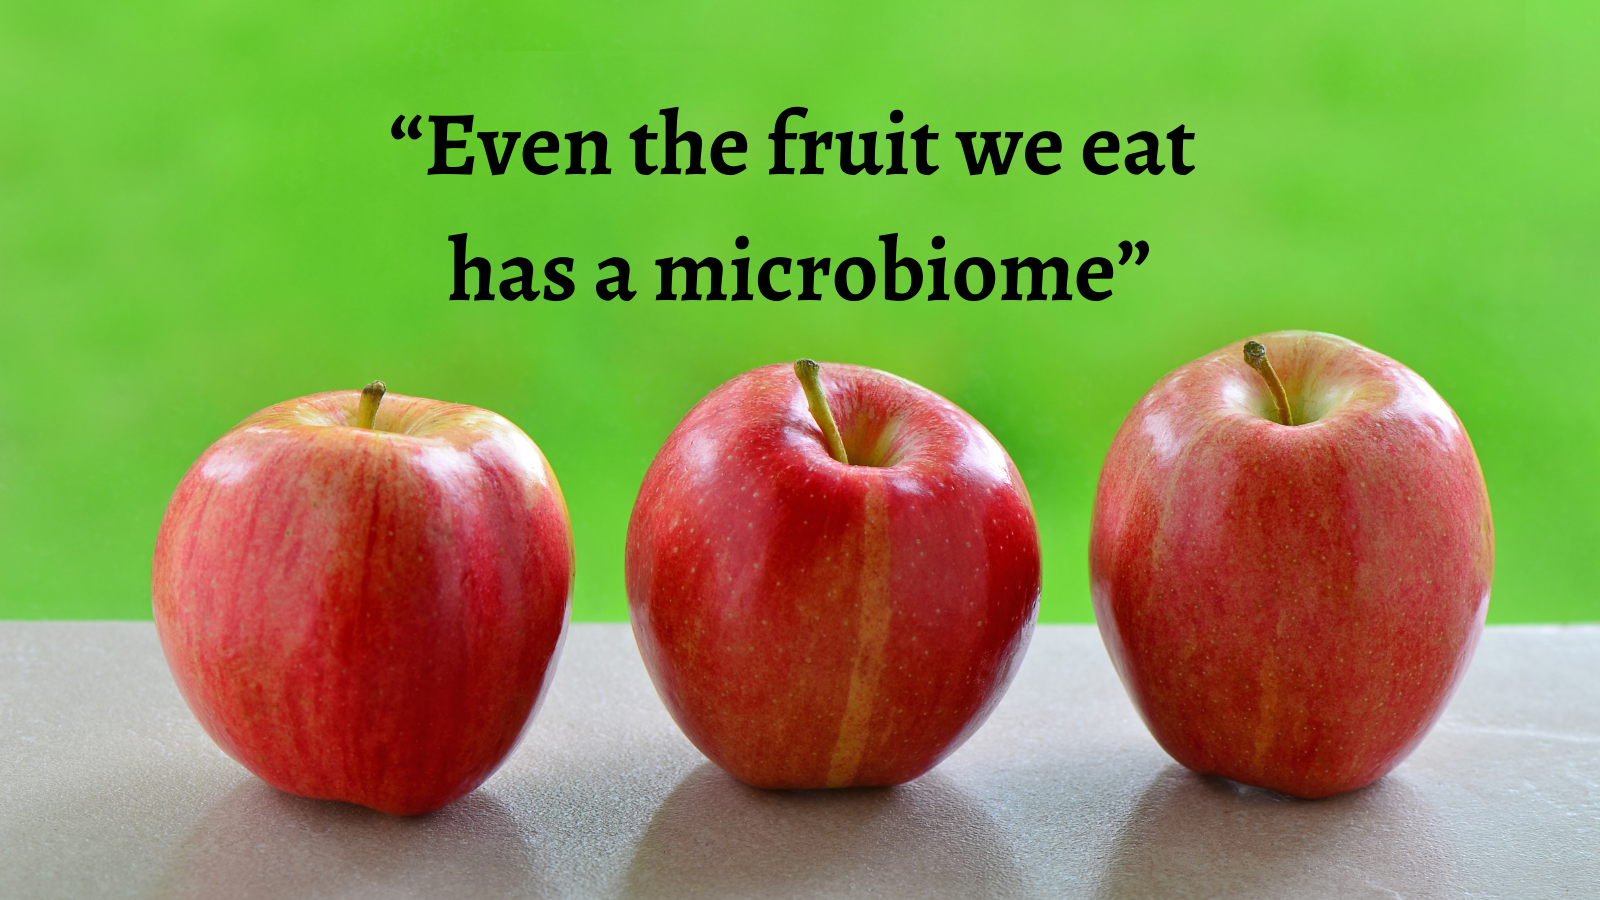 Those who eat organic apples, core and all, get 10 times the bacteria